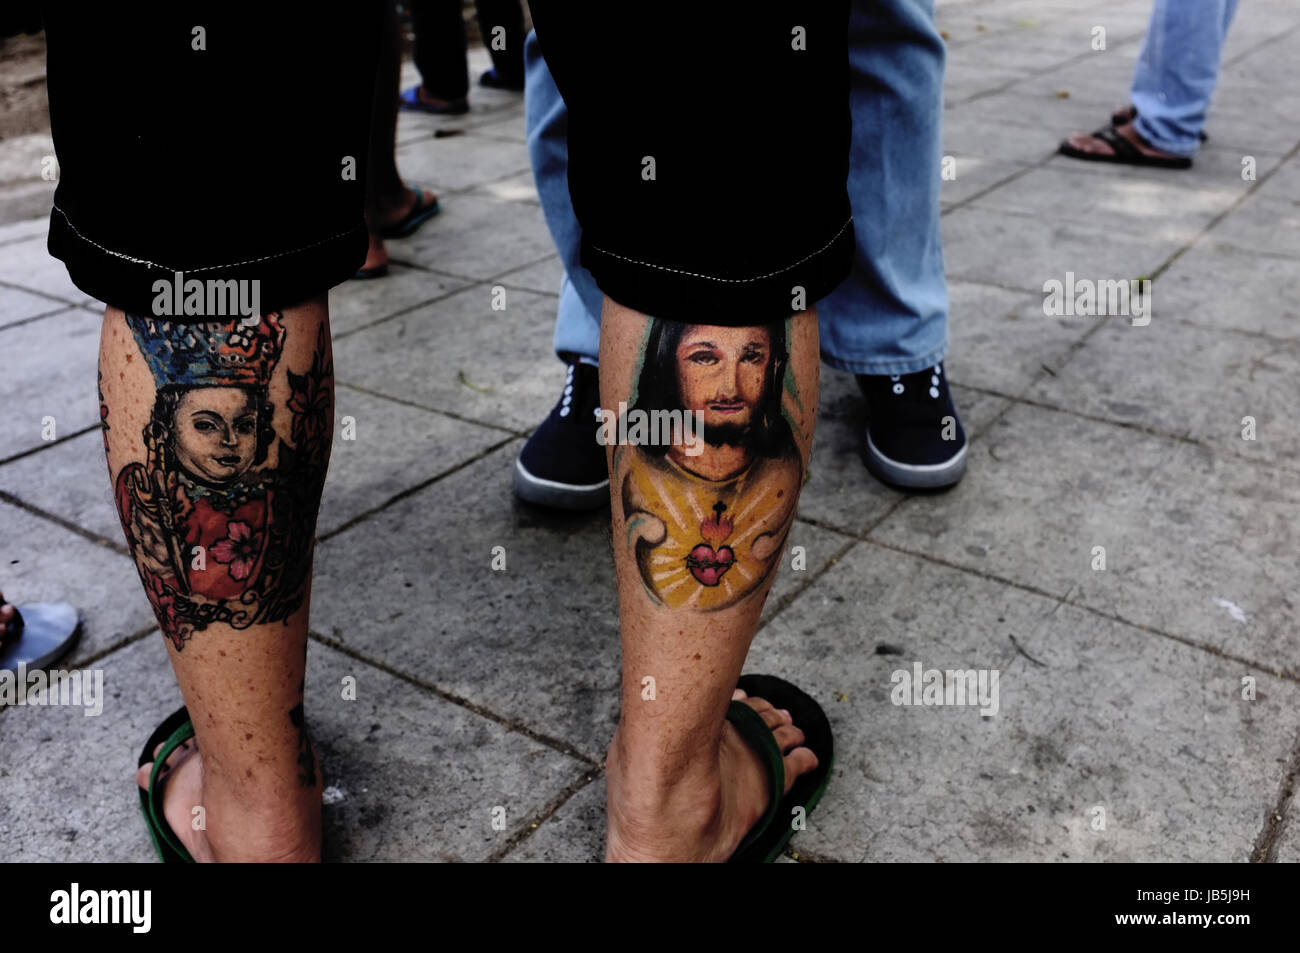 Cebu City, the Philippines - April 3, 2015. A man with Chrisitian motives tattoed on his legs is attending the Easter celebrations in Cebu City. Stock Photo